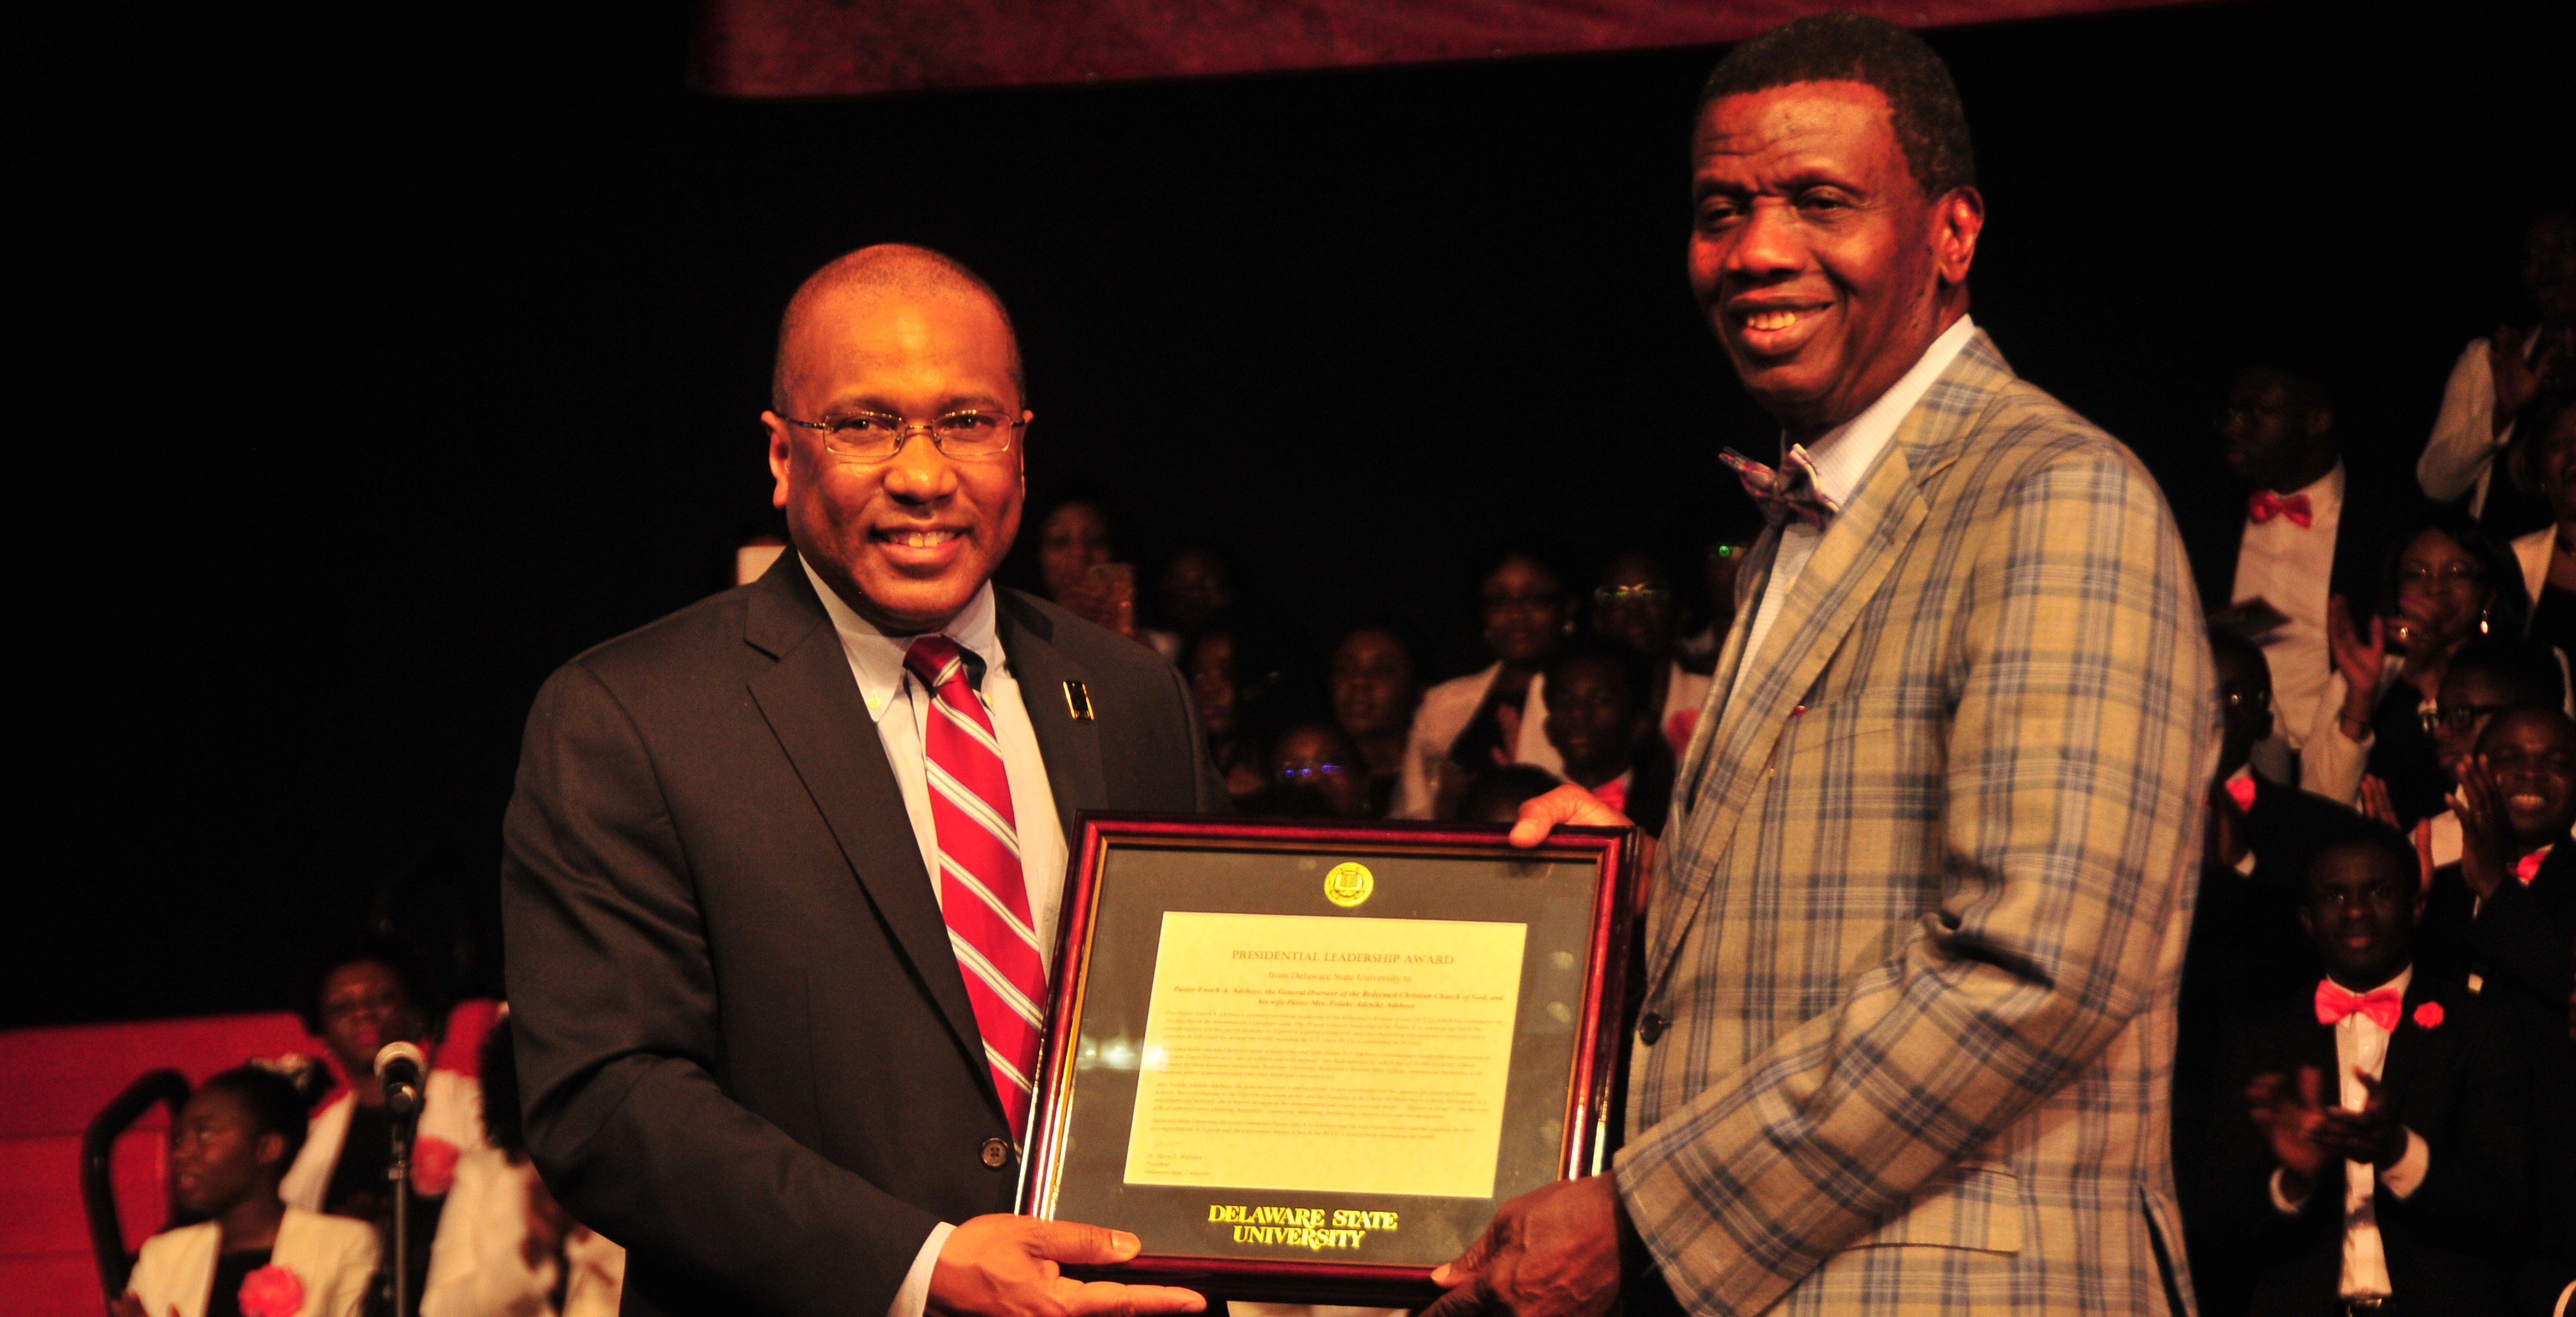 DSU President Harry L. Williams presents Enoch A. Adeboye, worldwide general overseer of the Redeemed Christian Church of God, with the President's Leadership Award during the denomination's Holy Ghost Festival of LIfe held at DSU on Feb. 24.